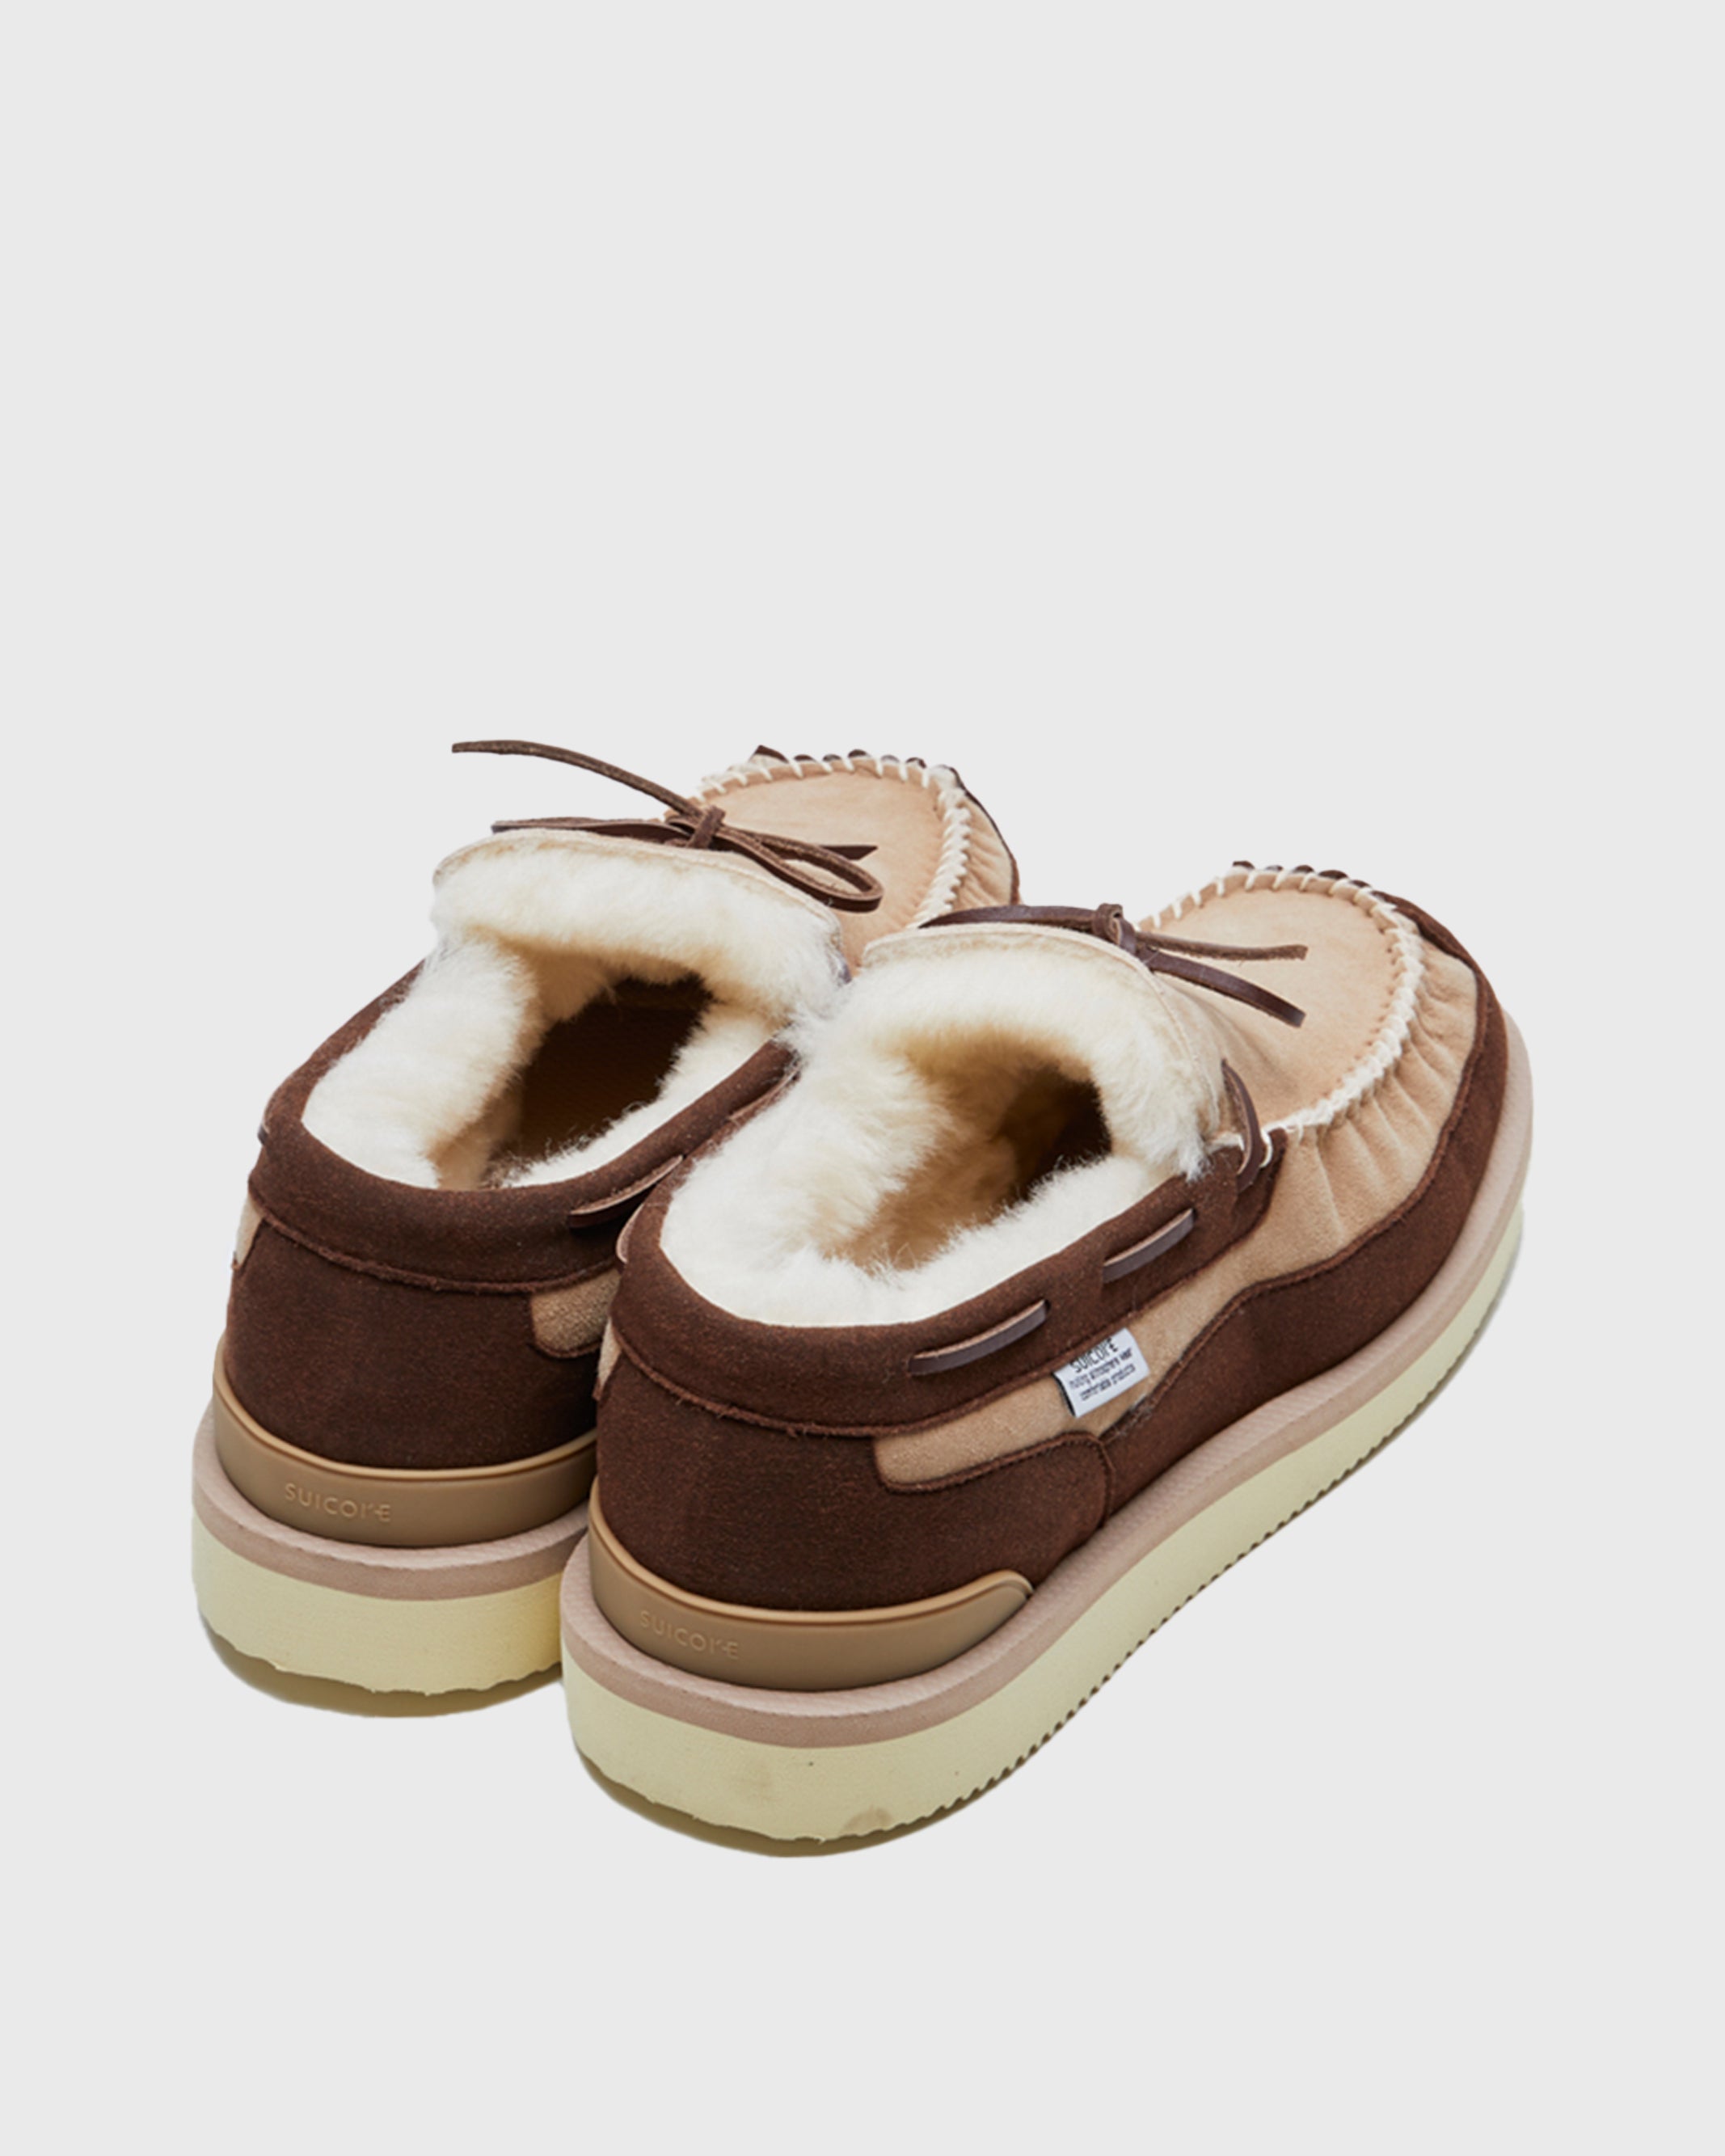 SUICOKE OWM-M2ab in Beige OG-199M2AB | Shop from eightywingold an official brand partner for SUICOKE Canada and US.